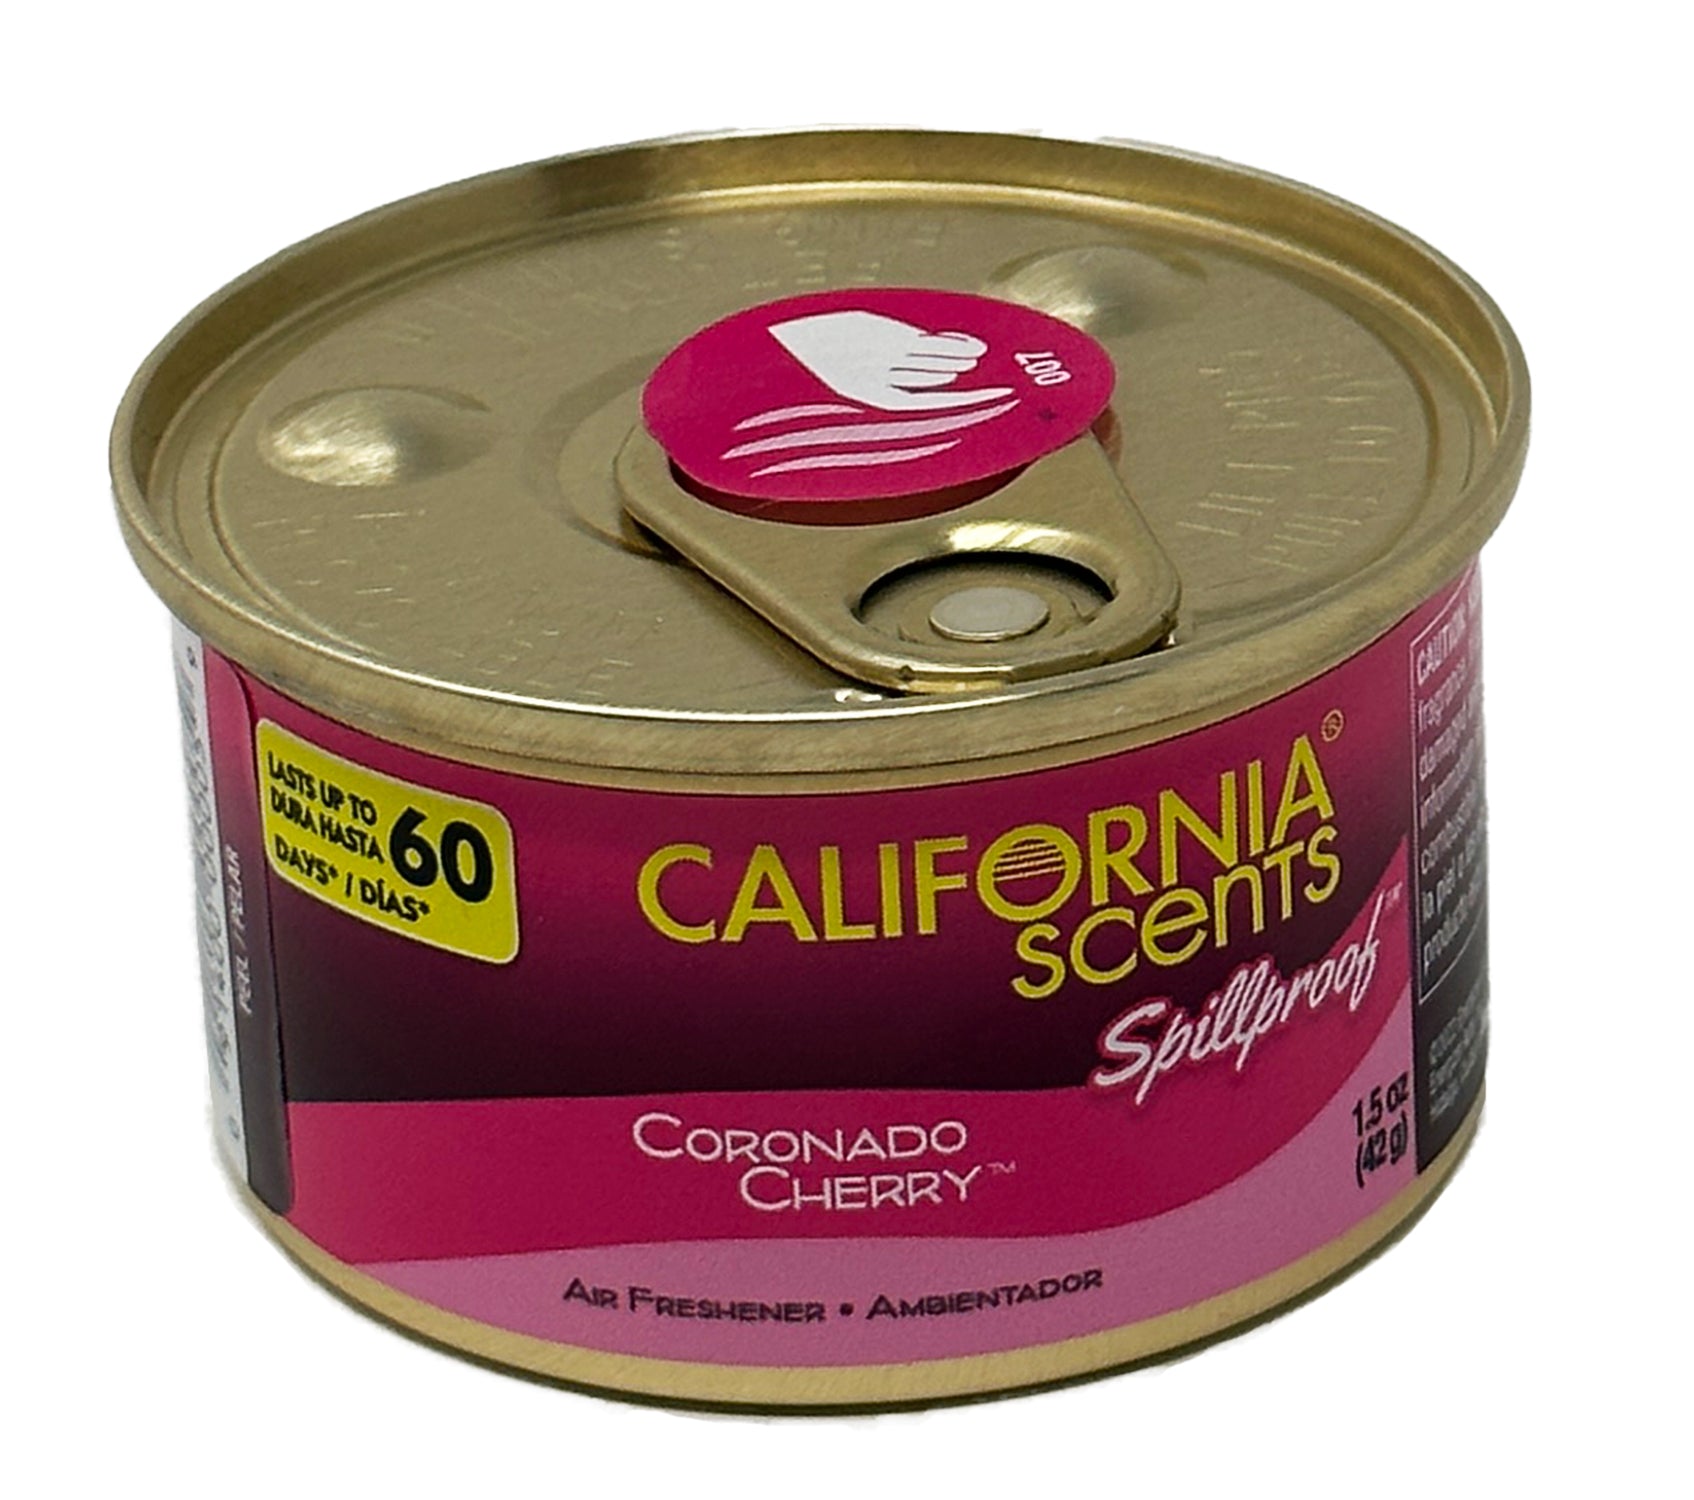 California Scents Spillproof Car Air Freshener - The Best Car Air Freshener  and Odor Eliminator for Your Vehicle, Coronado Cherry by GOSO Direct